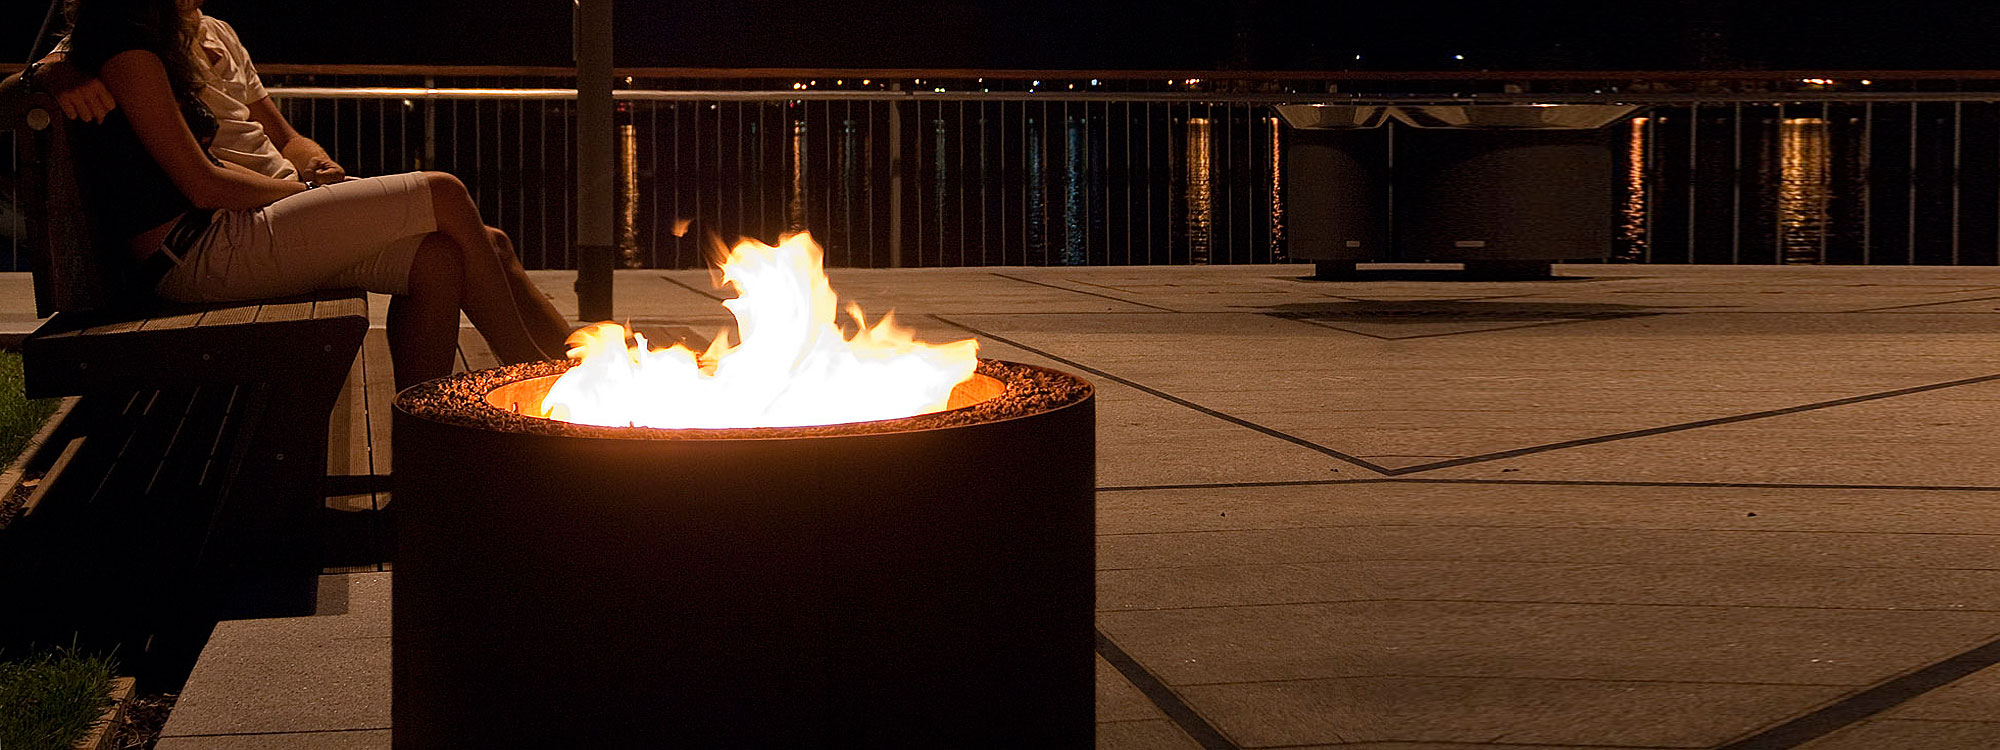 Image of couple enjoying the warmth of AK47 Mangiafuoco small fire pit at night on shore of lake.